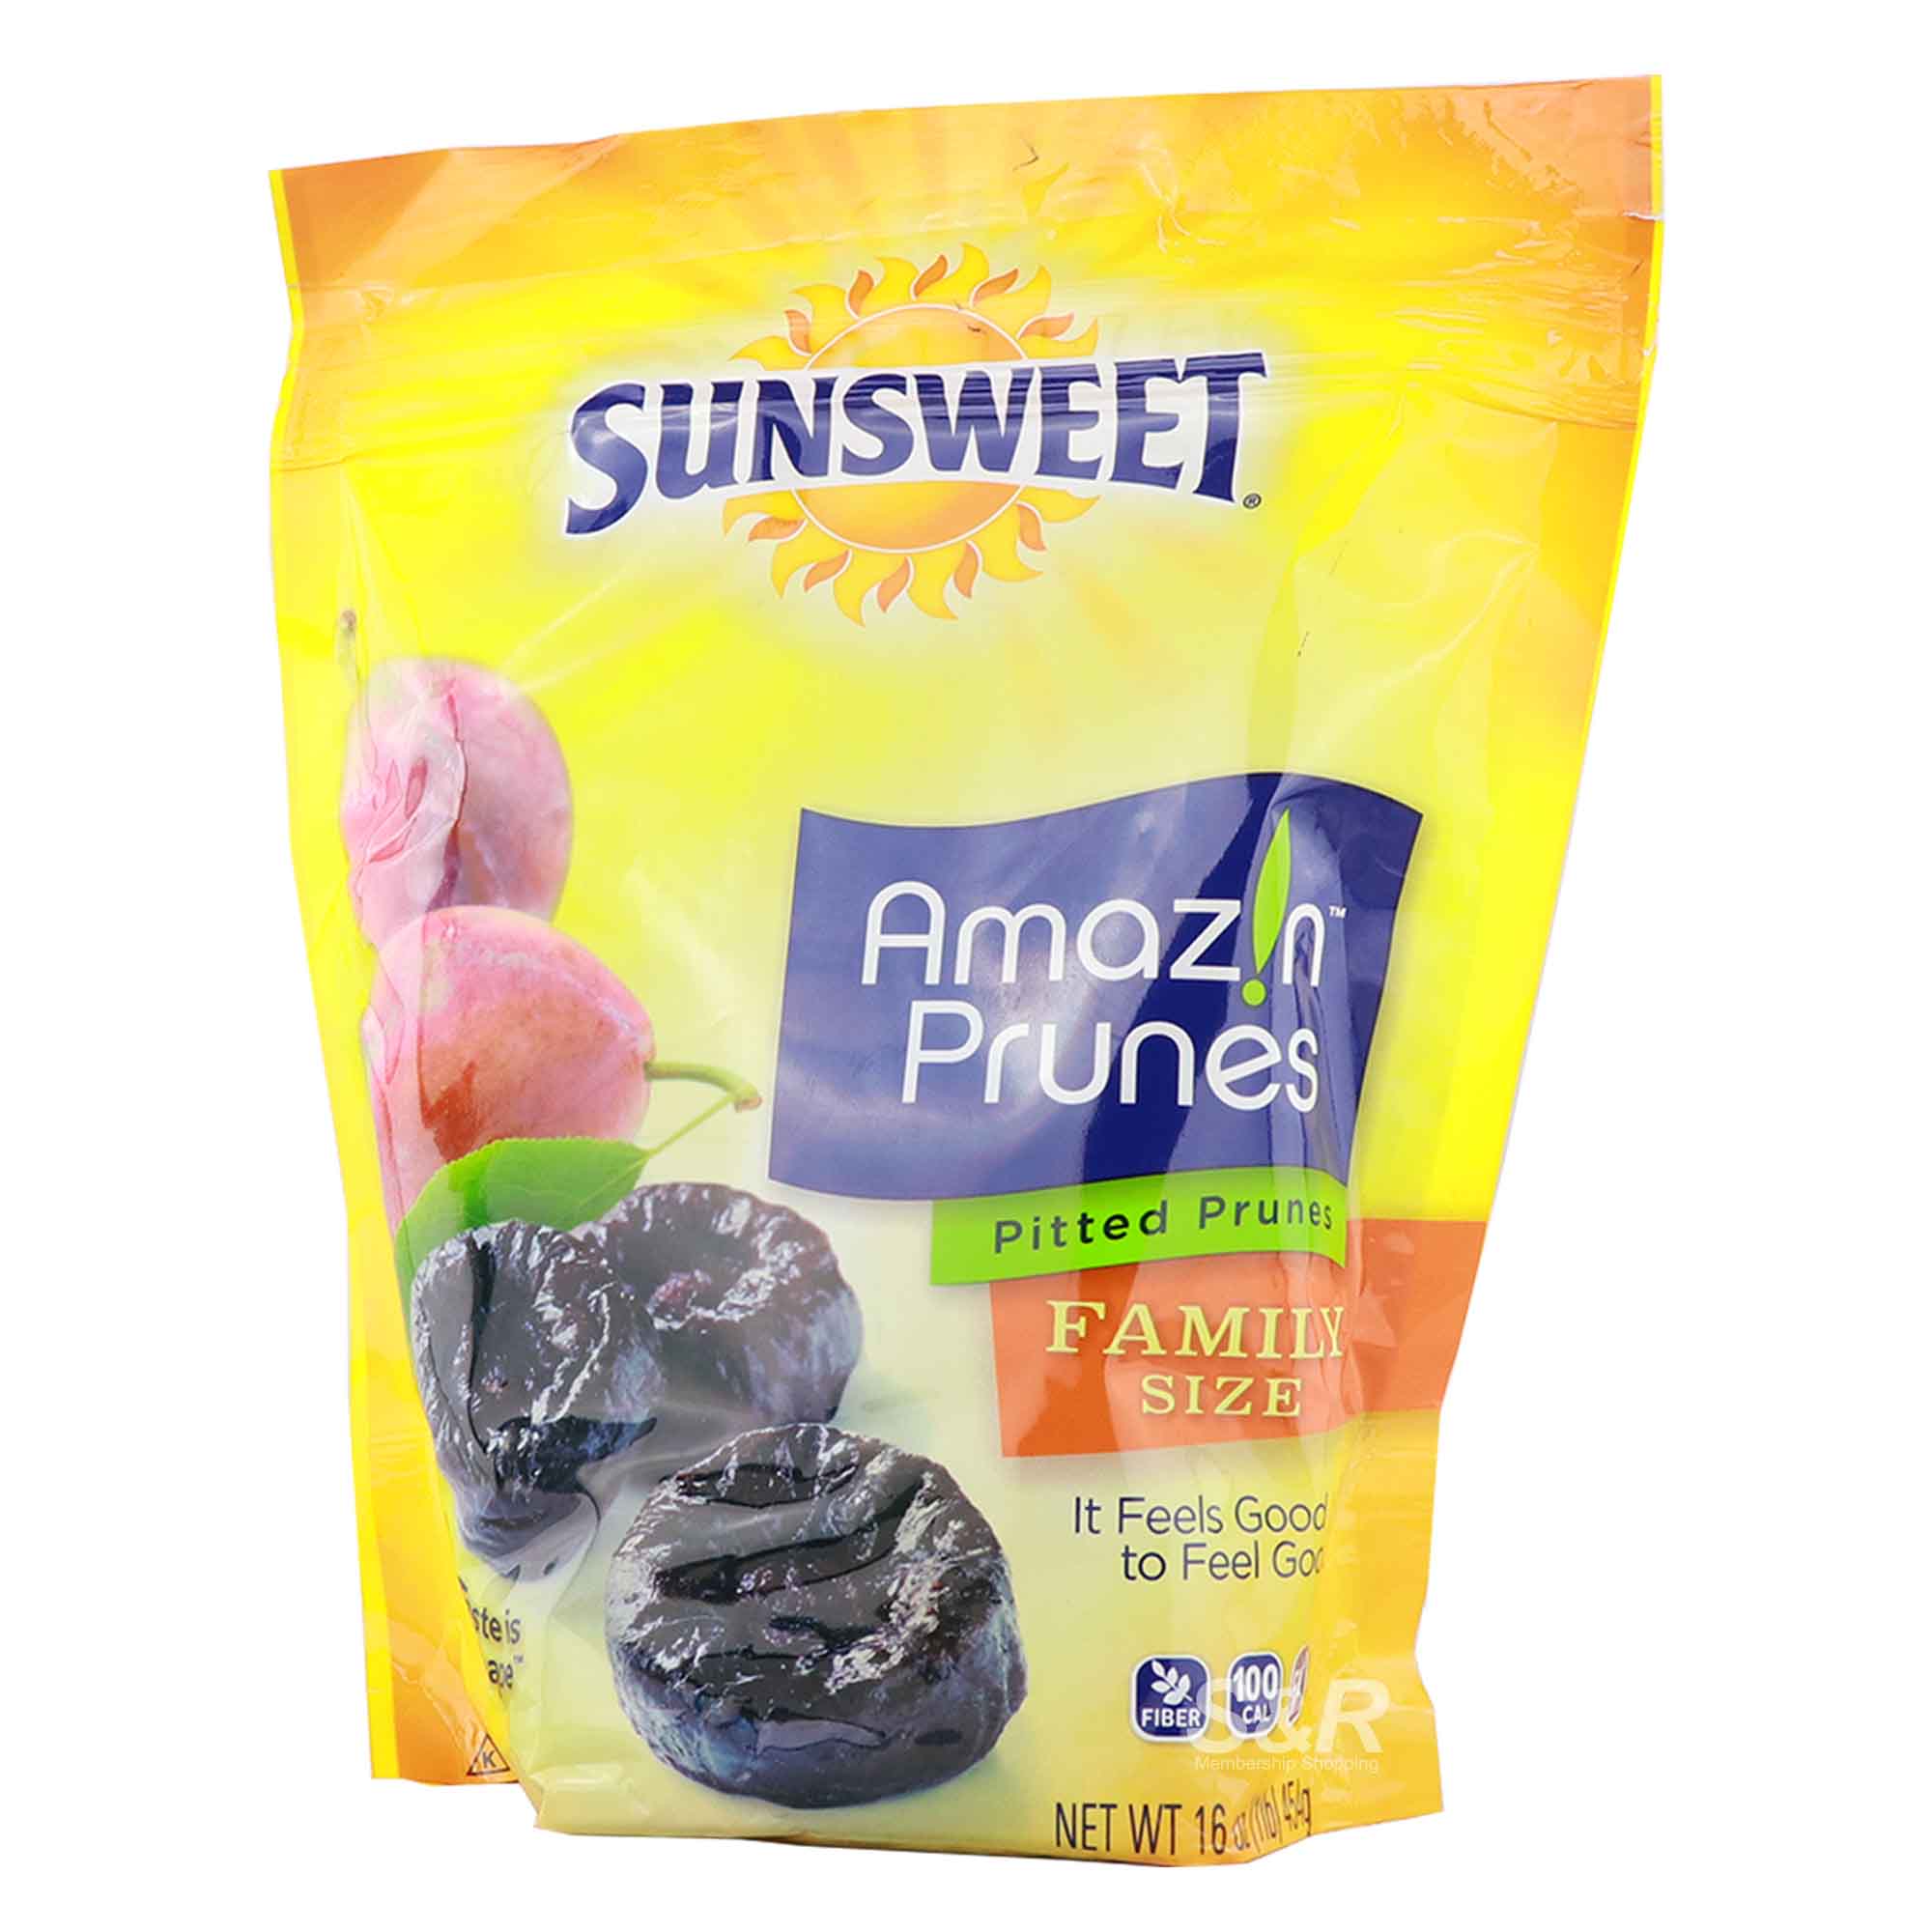 Sunsweet Pitted Prunes Family Size 454g